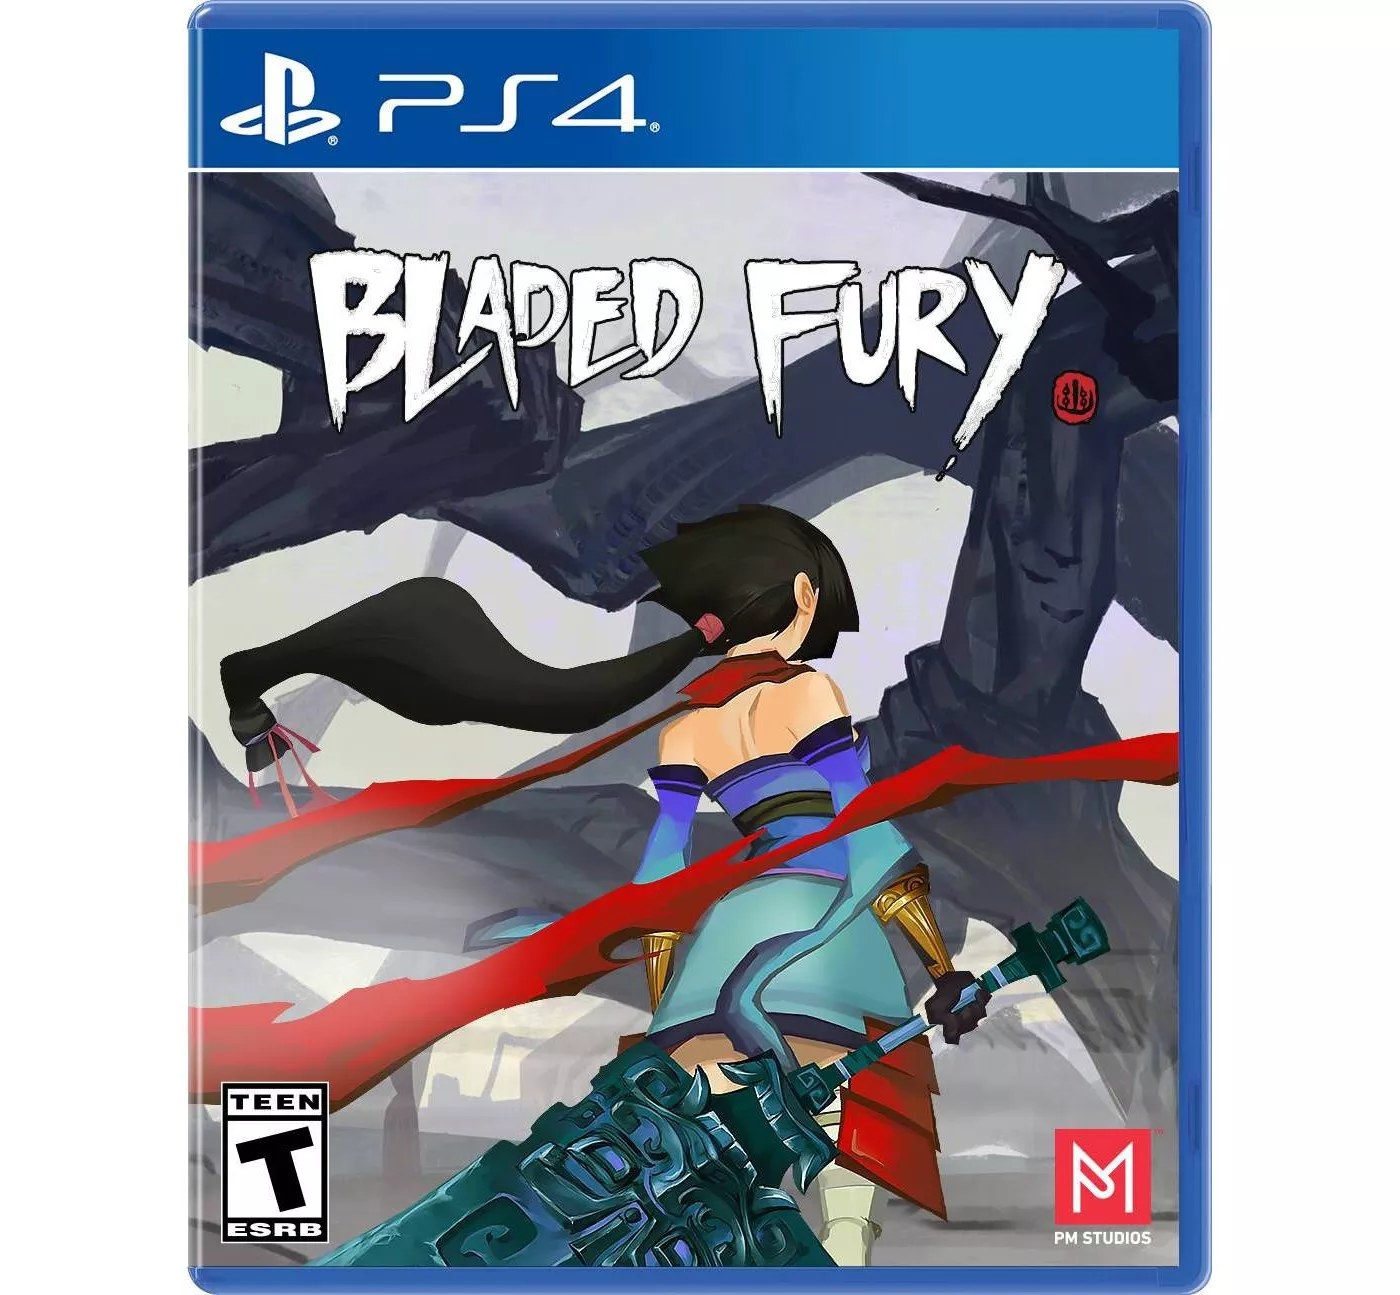 The Bladed Fury video game